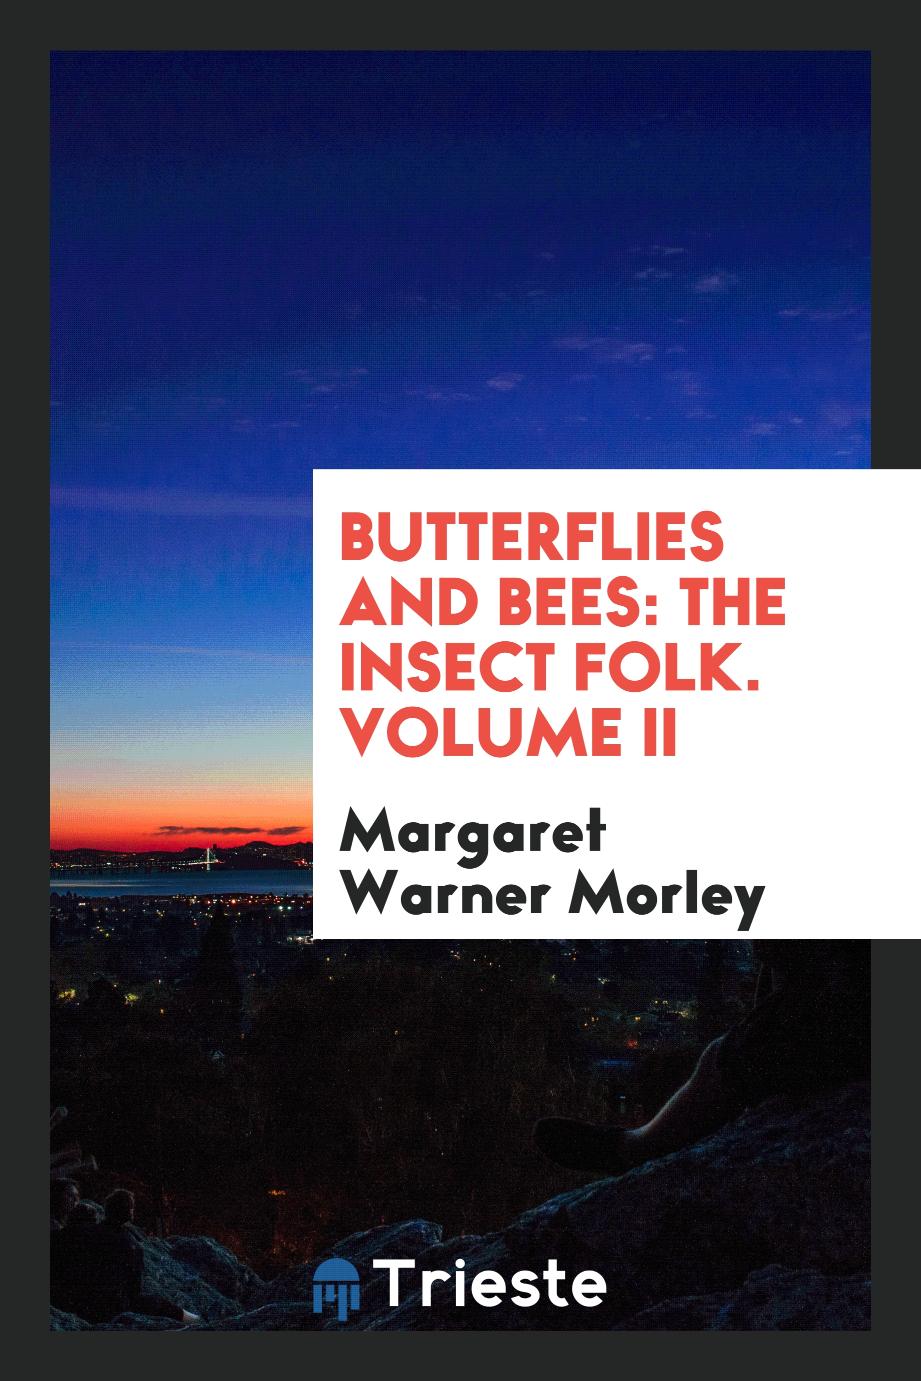 Butterflies and Bees: The Insect Folk. Volume II